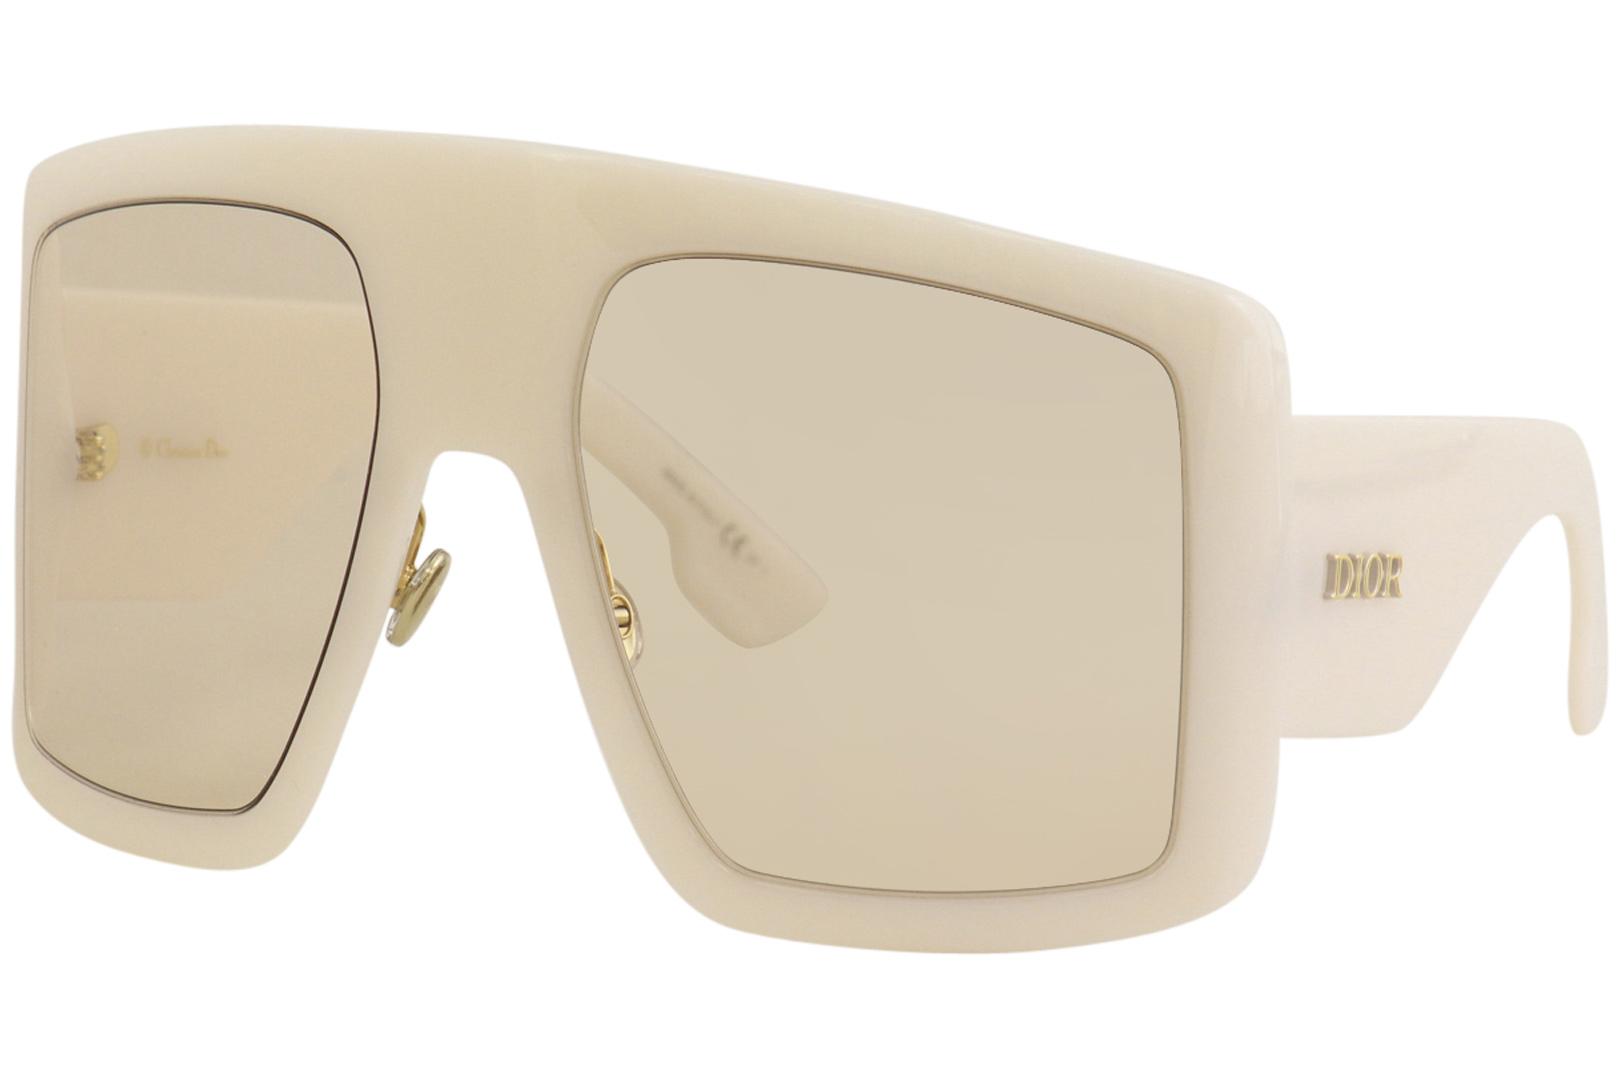 Summer Sunglasses Styles: Dior SoLight Sunglasses Collection